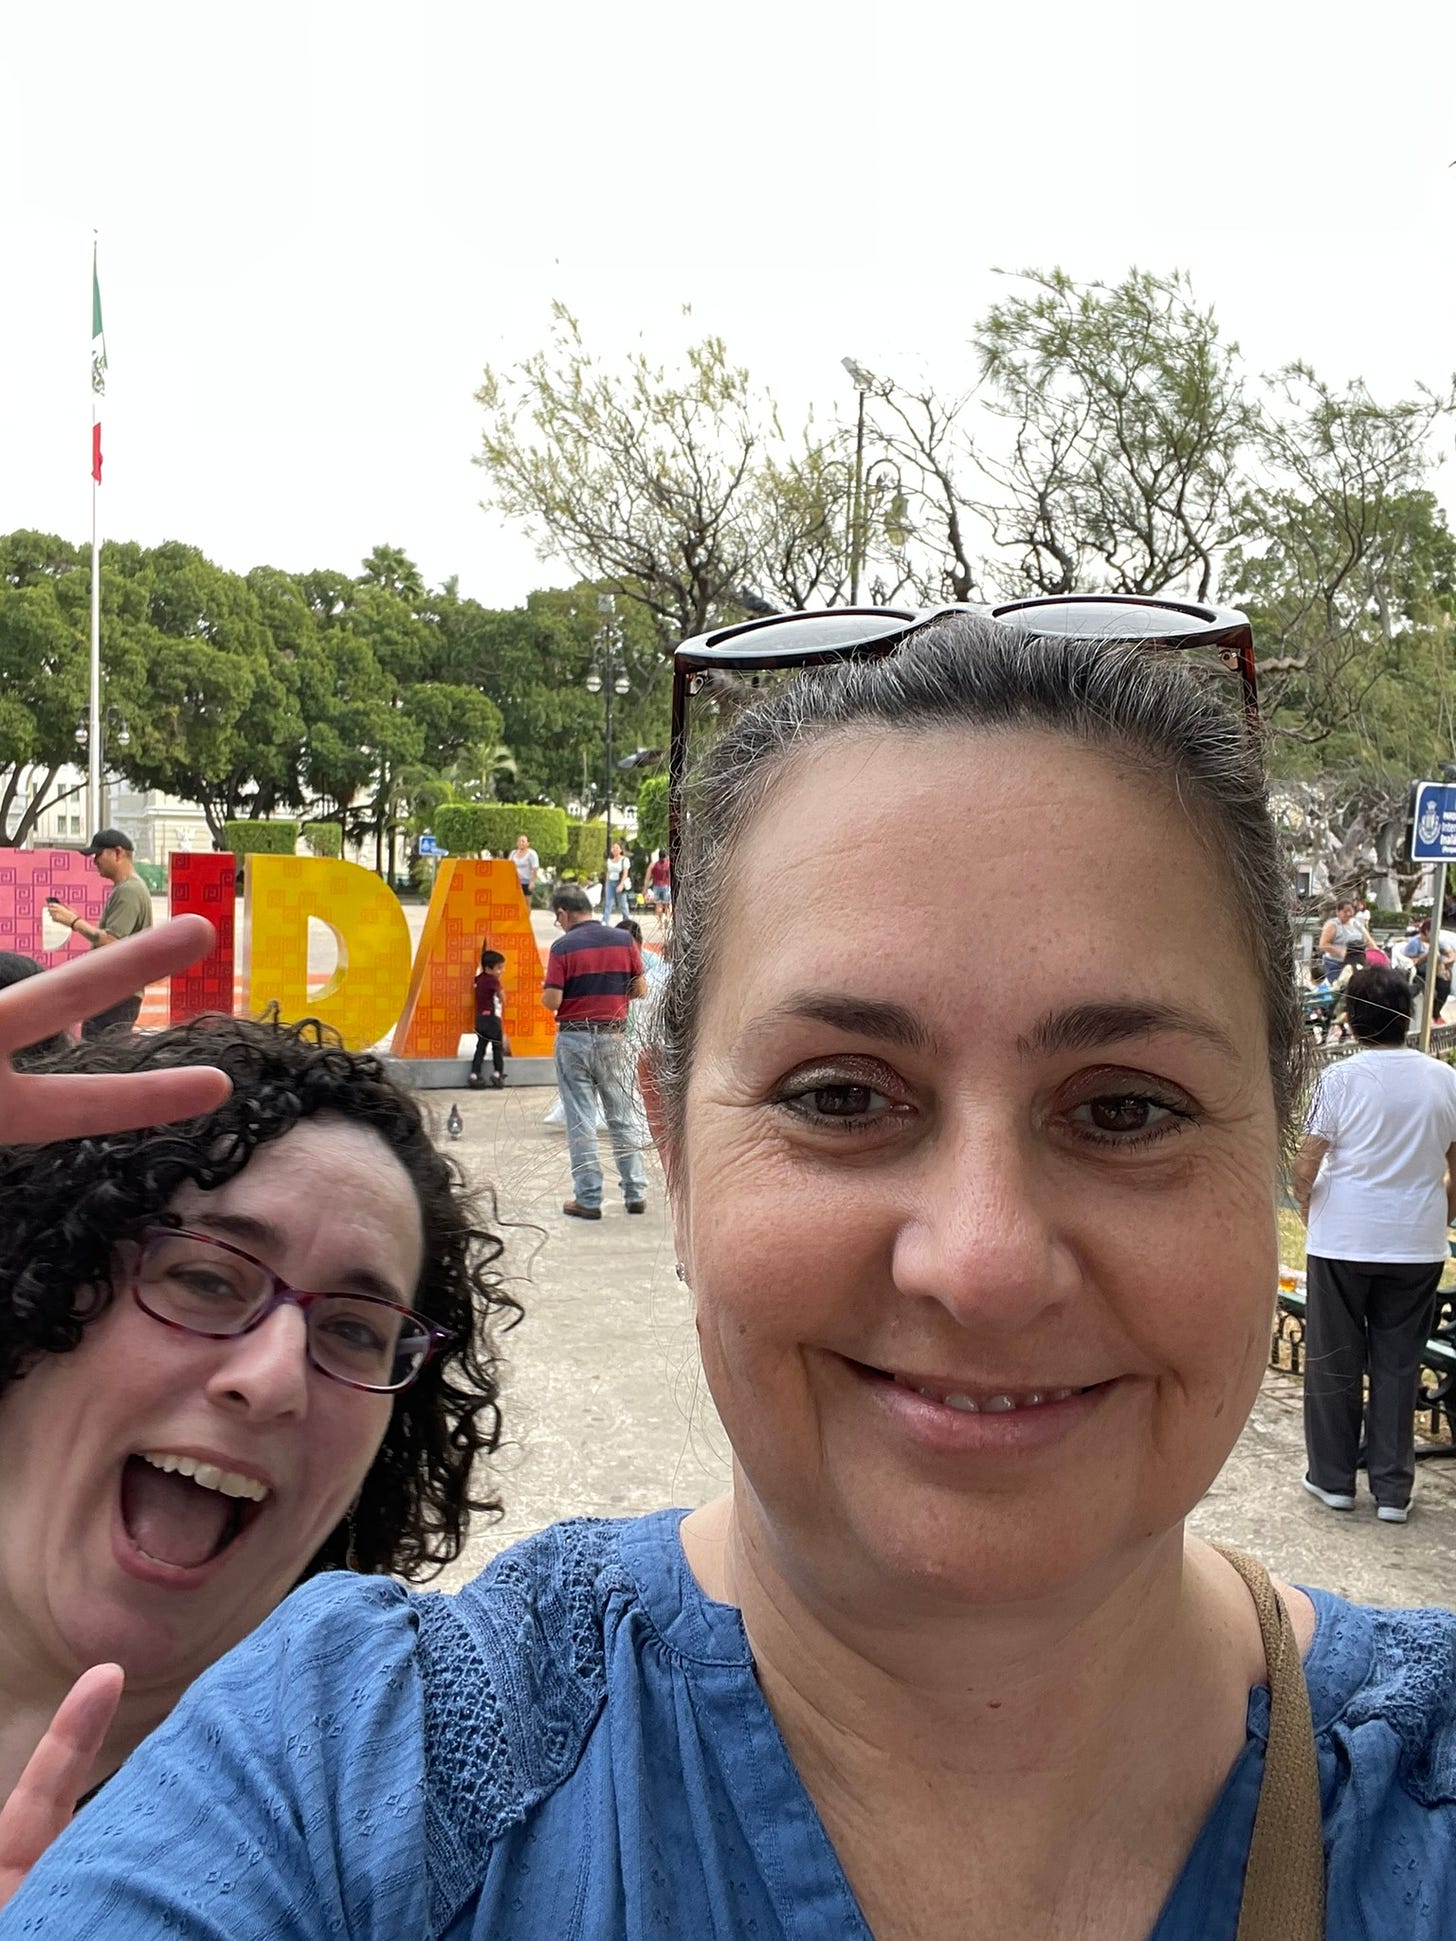 Posing for a selfie in front of the Merida sign at the city center, with photobomb by my friend Theresa.